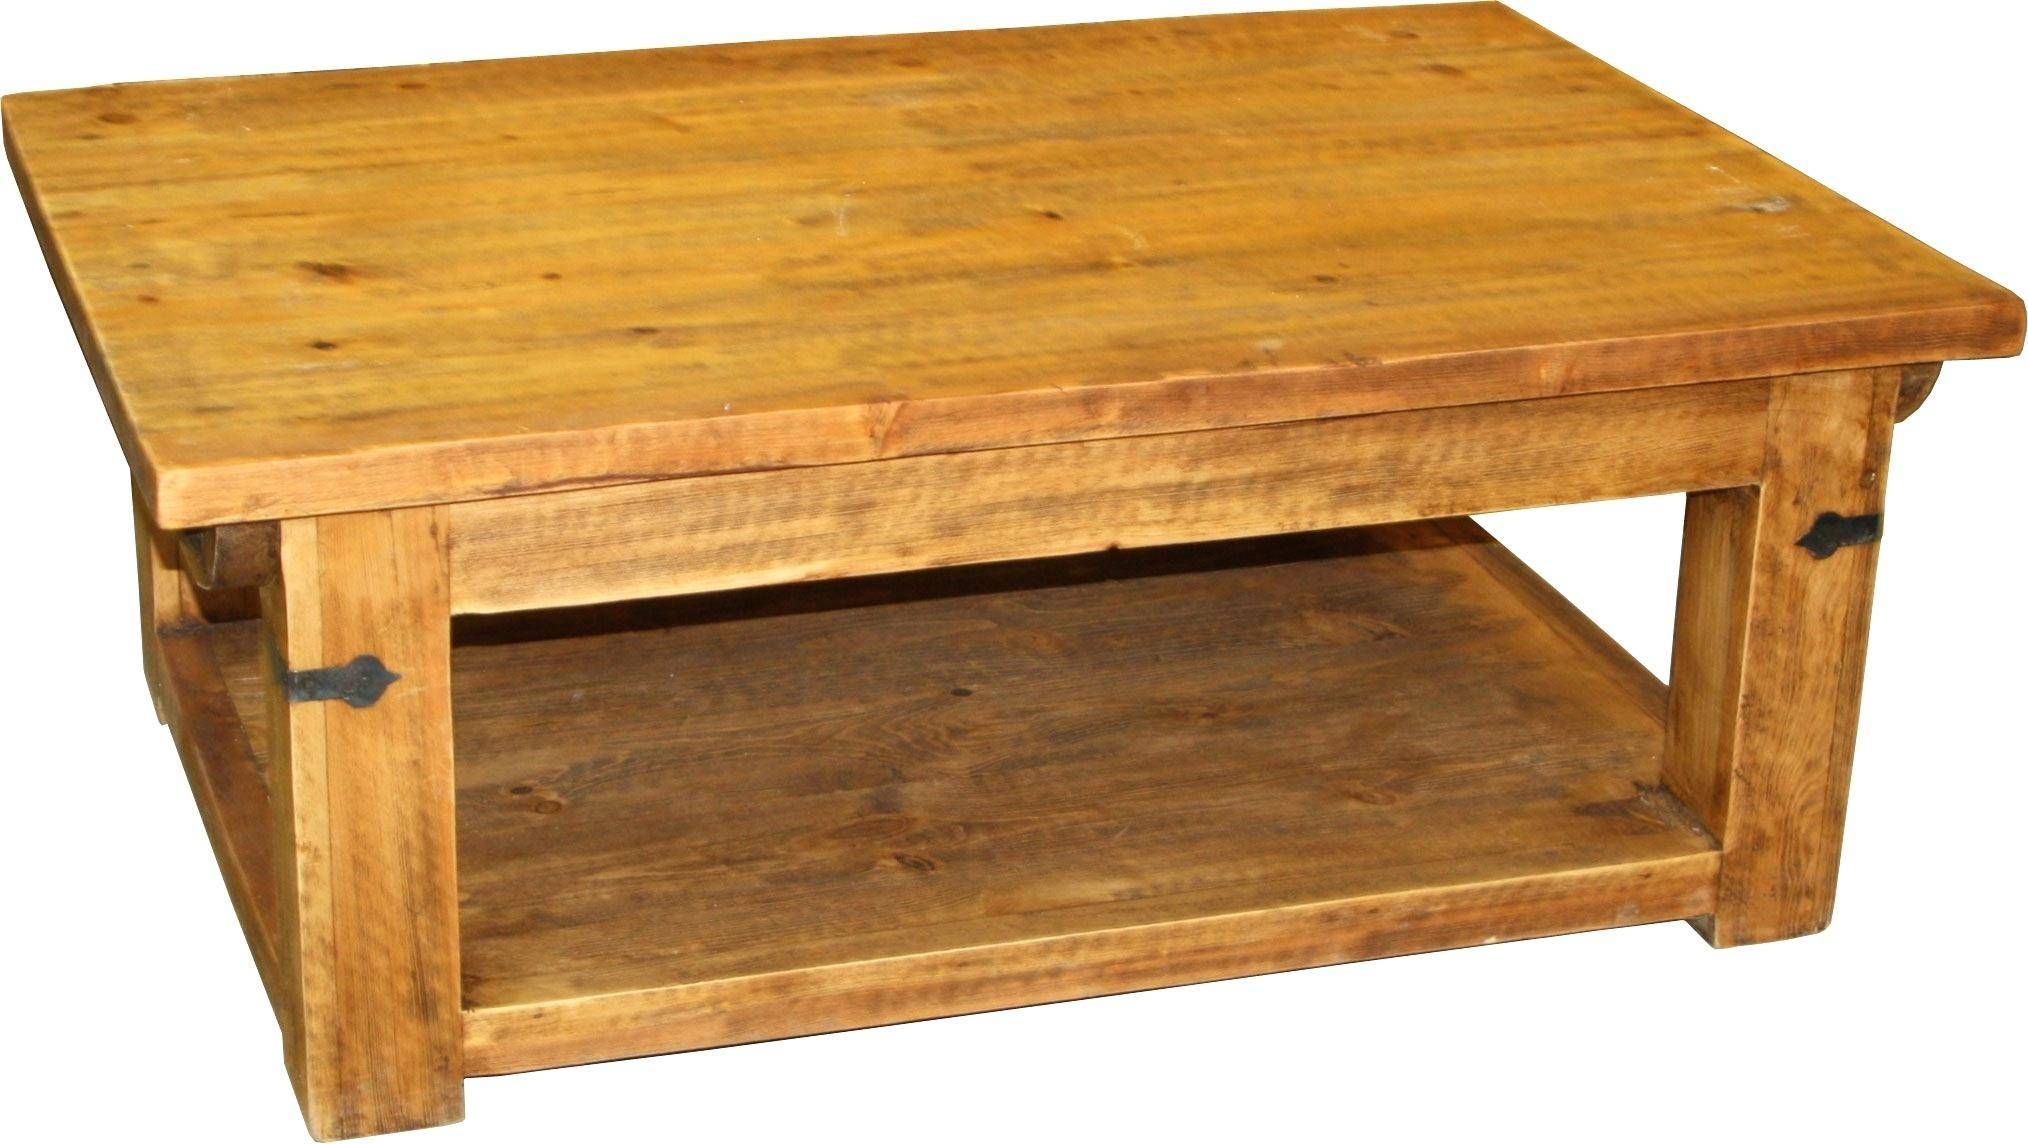 Coffee Table ~ Woodworking Pine Coffee Table Plans Pdf Download Intended For Pine Coffee Tables With Storage (View 23 of 30)